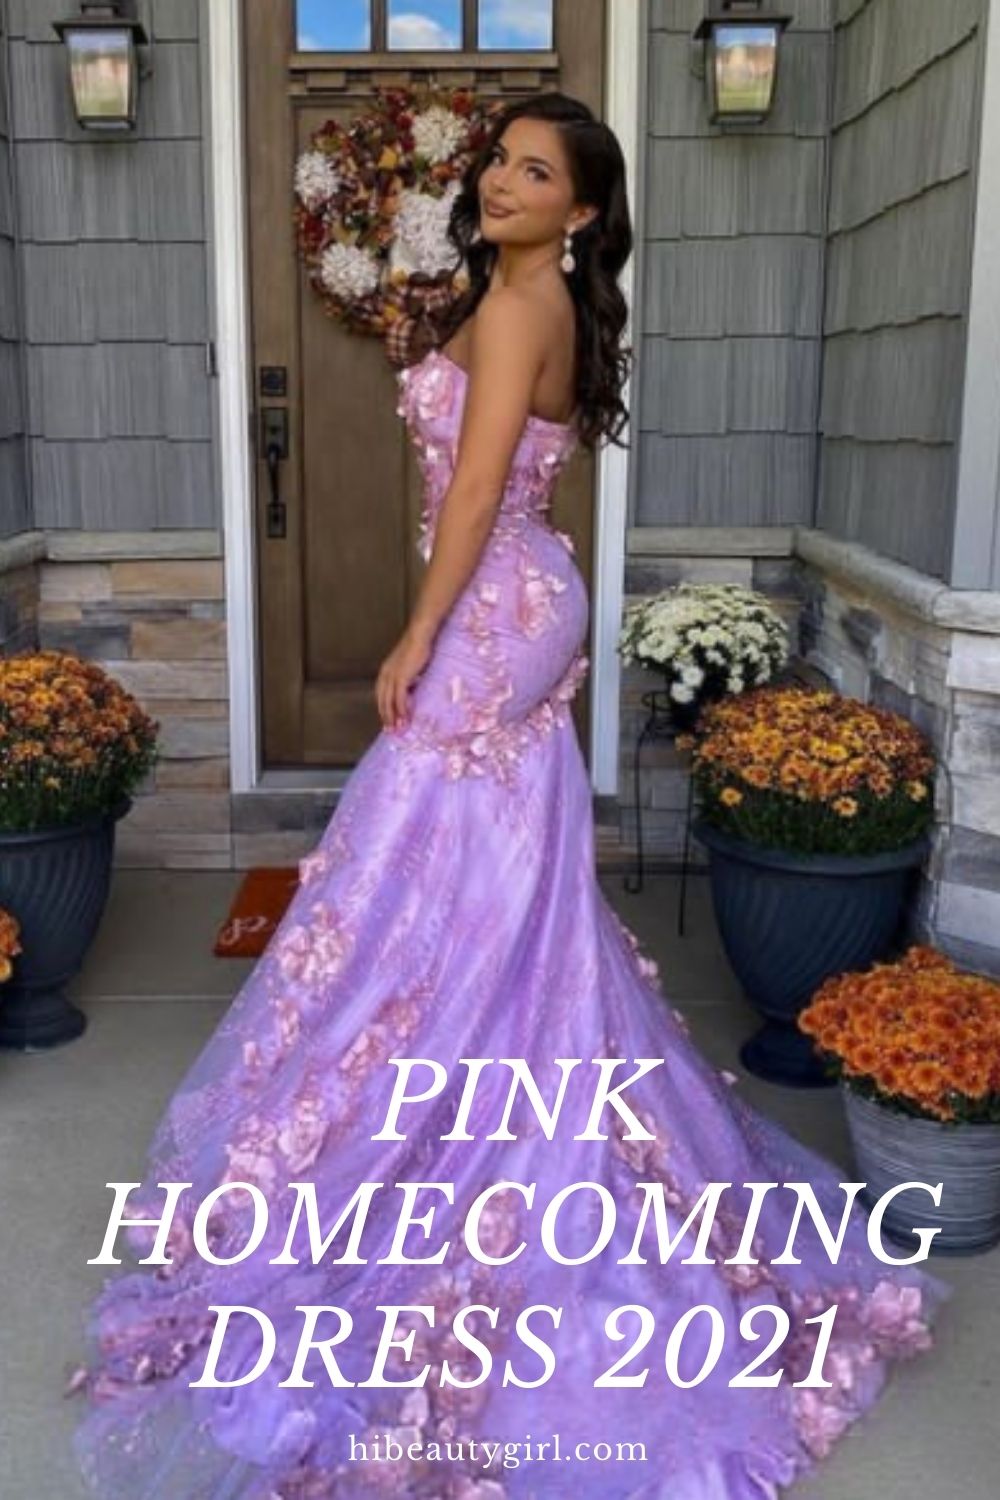 Pink homecoming dresses